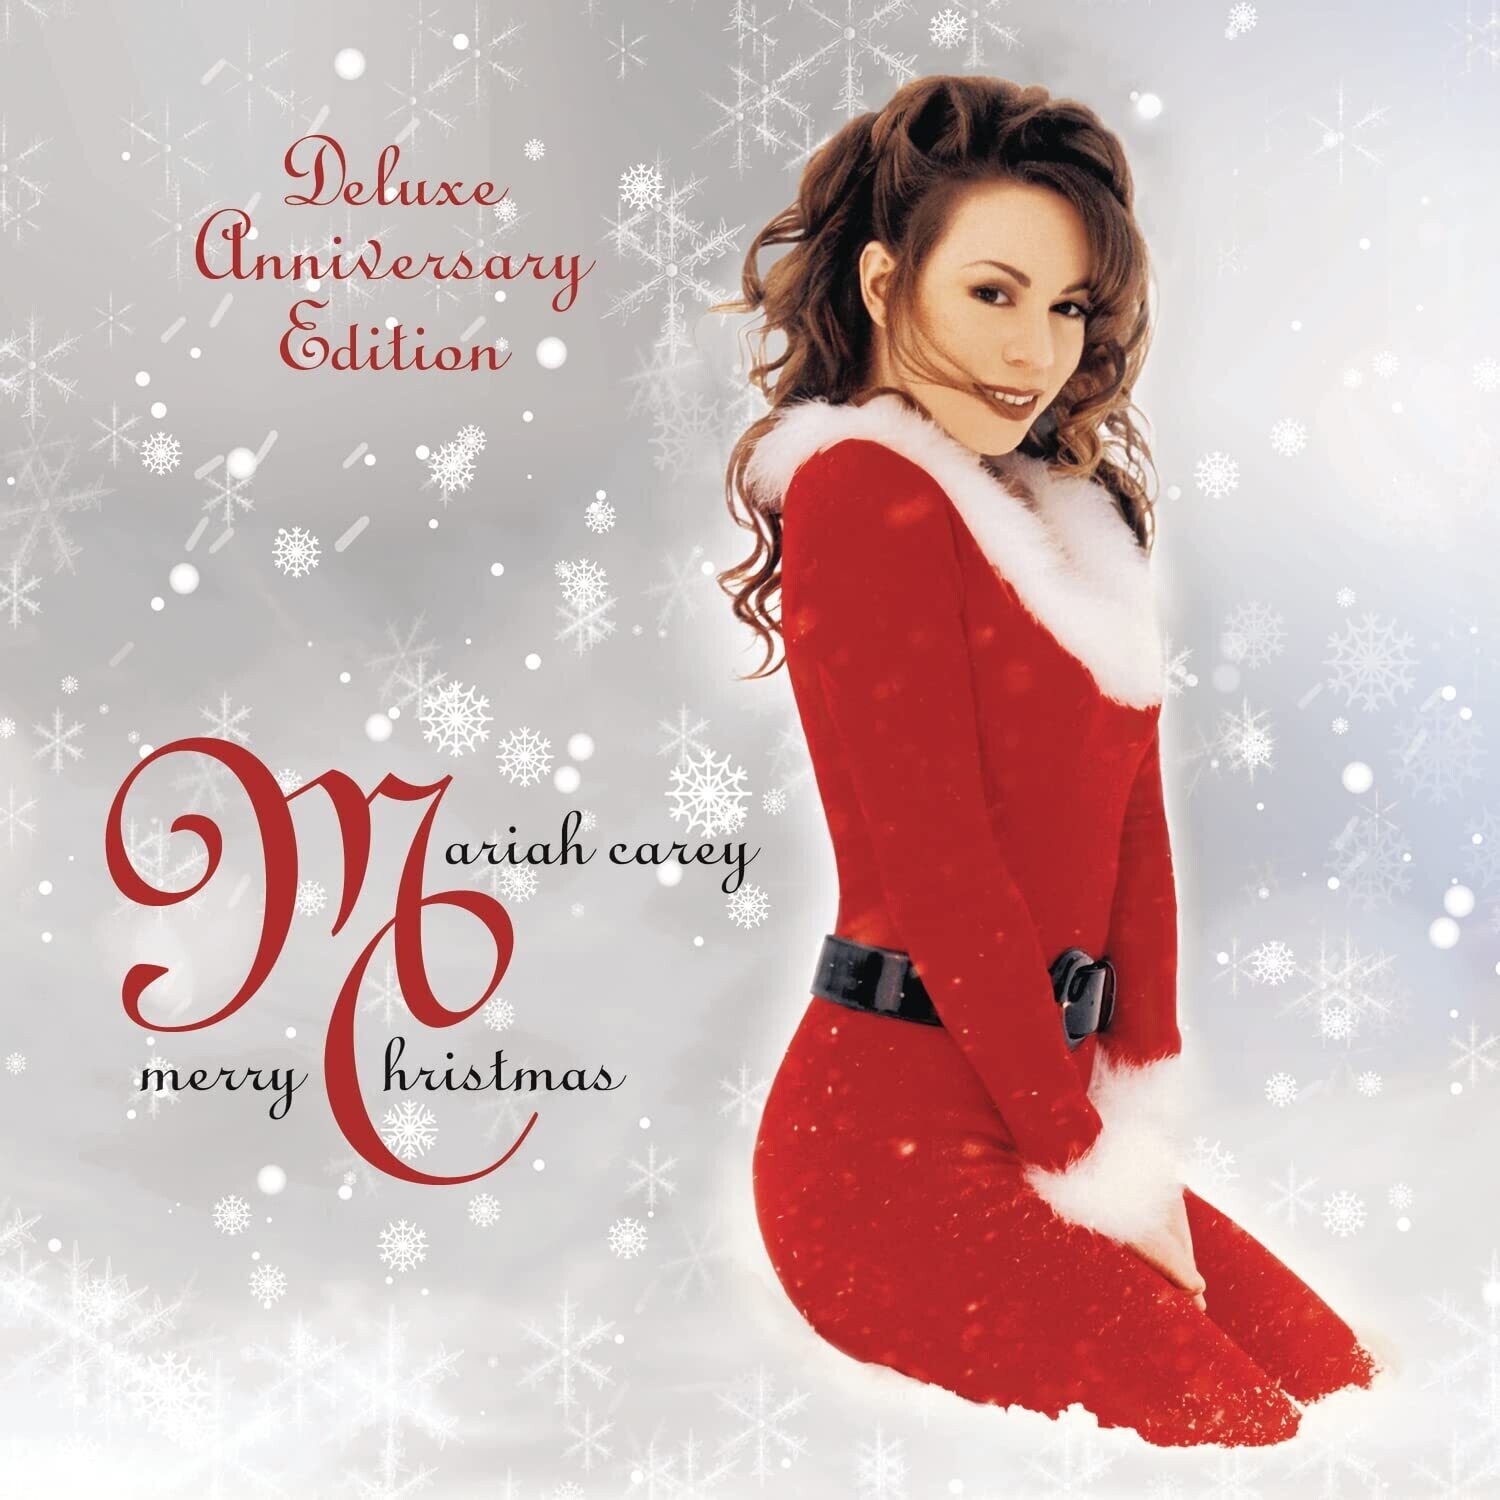 Mariah Carey - Merry Christmas (Deluxe Anniversary Edition)(2019) 2CD